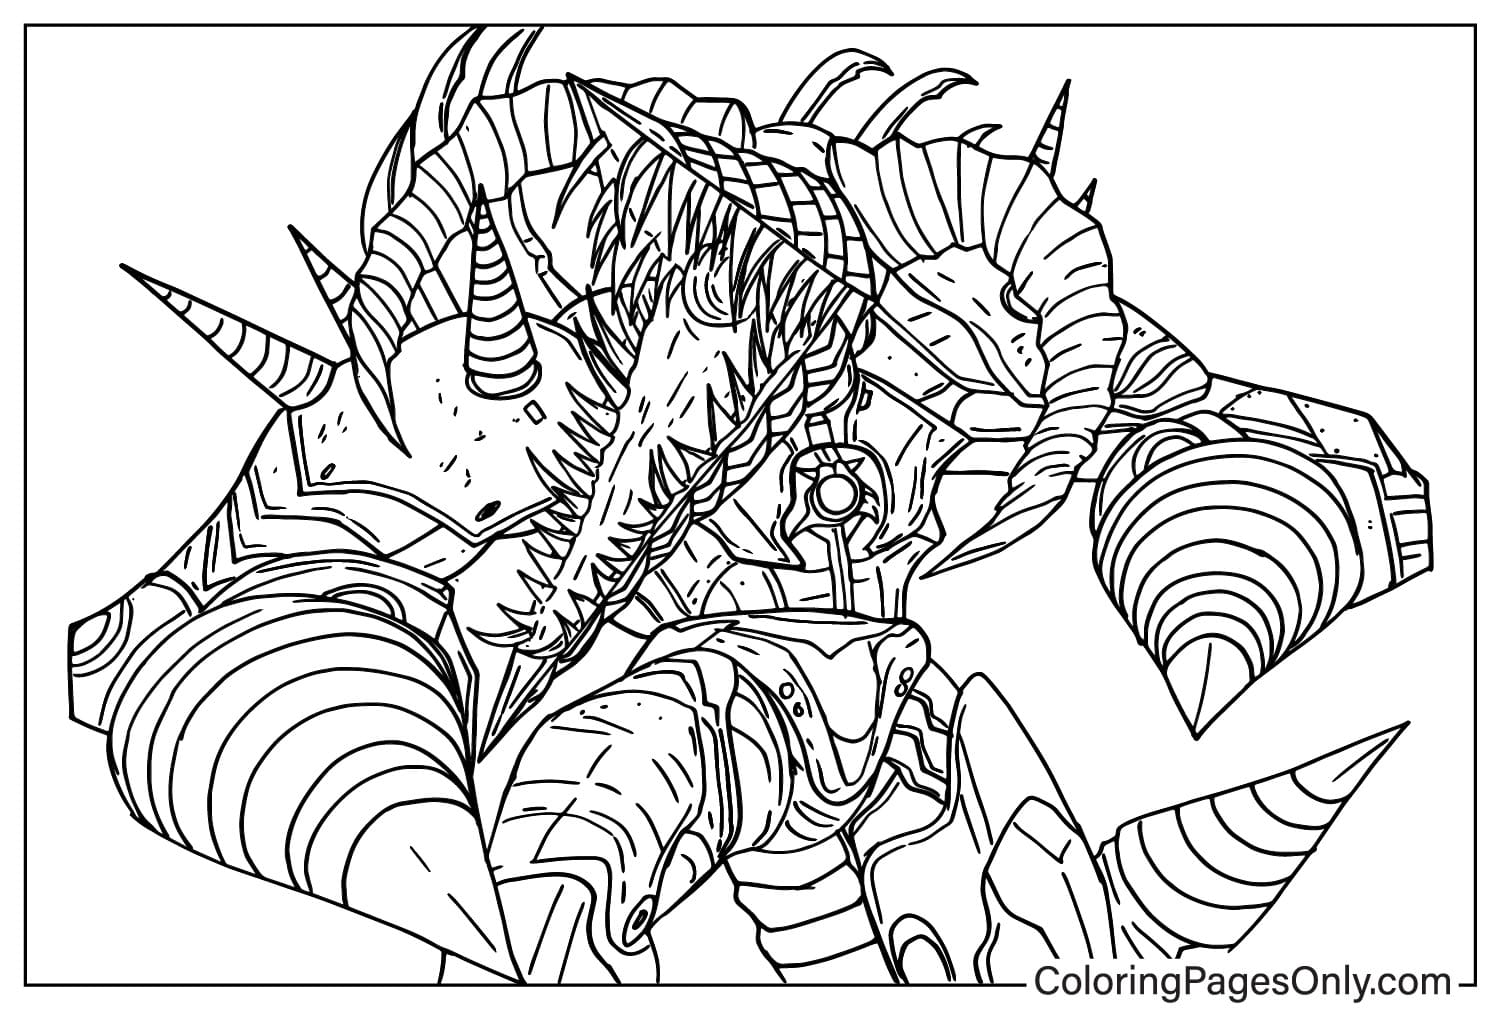 Draw Upgraded Titan Drill Man Coloring Page from Upgraded Titan Drill Man